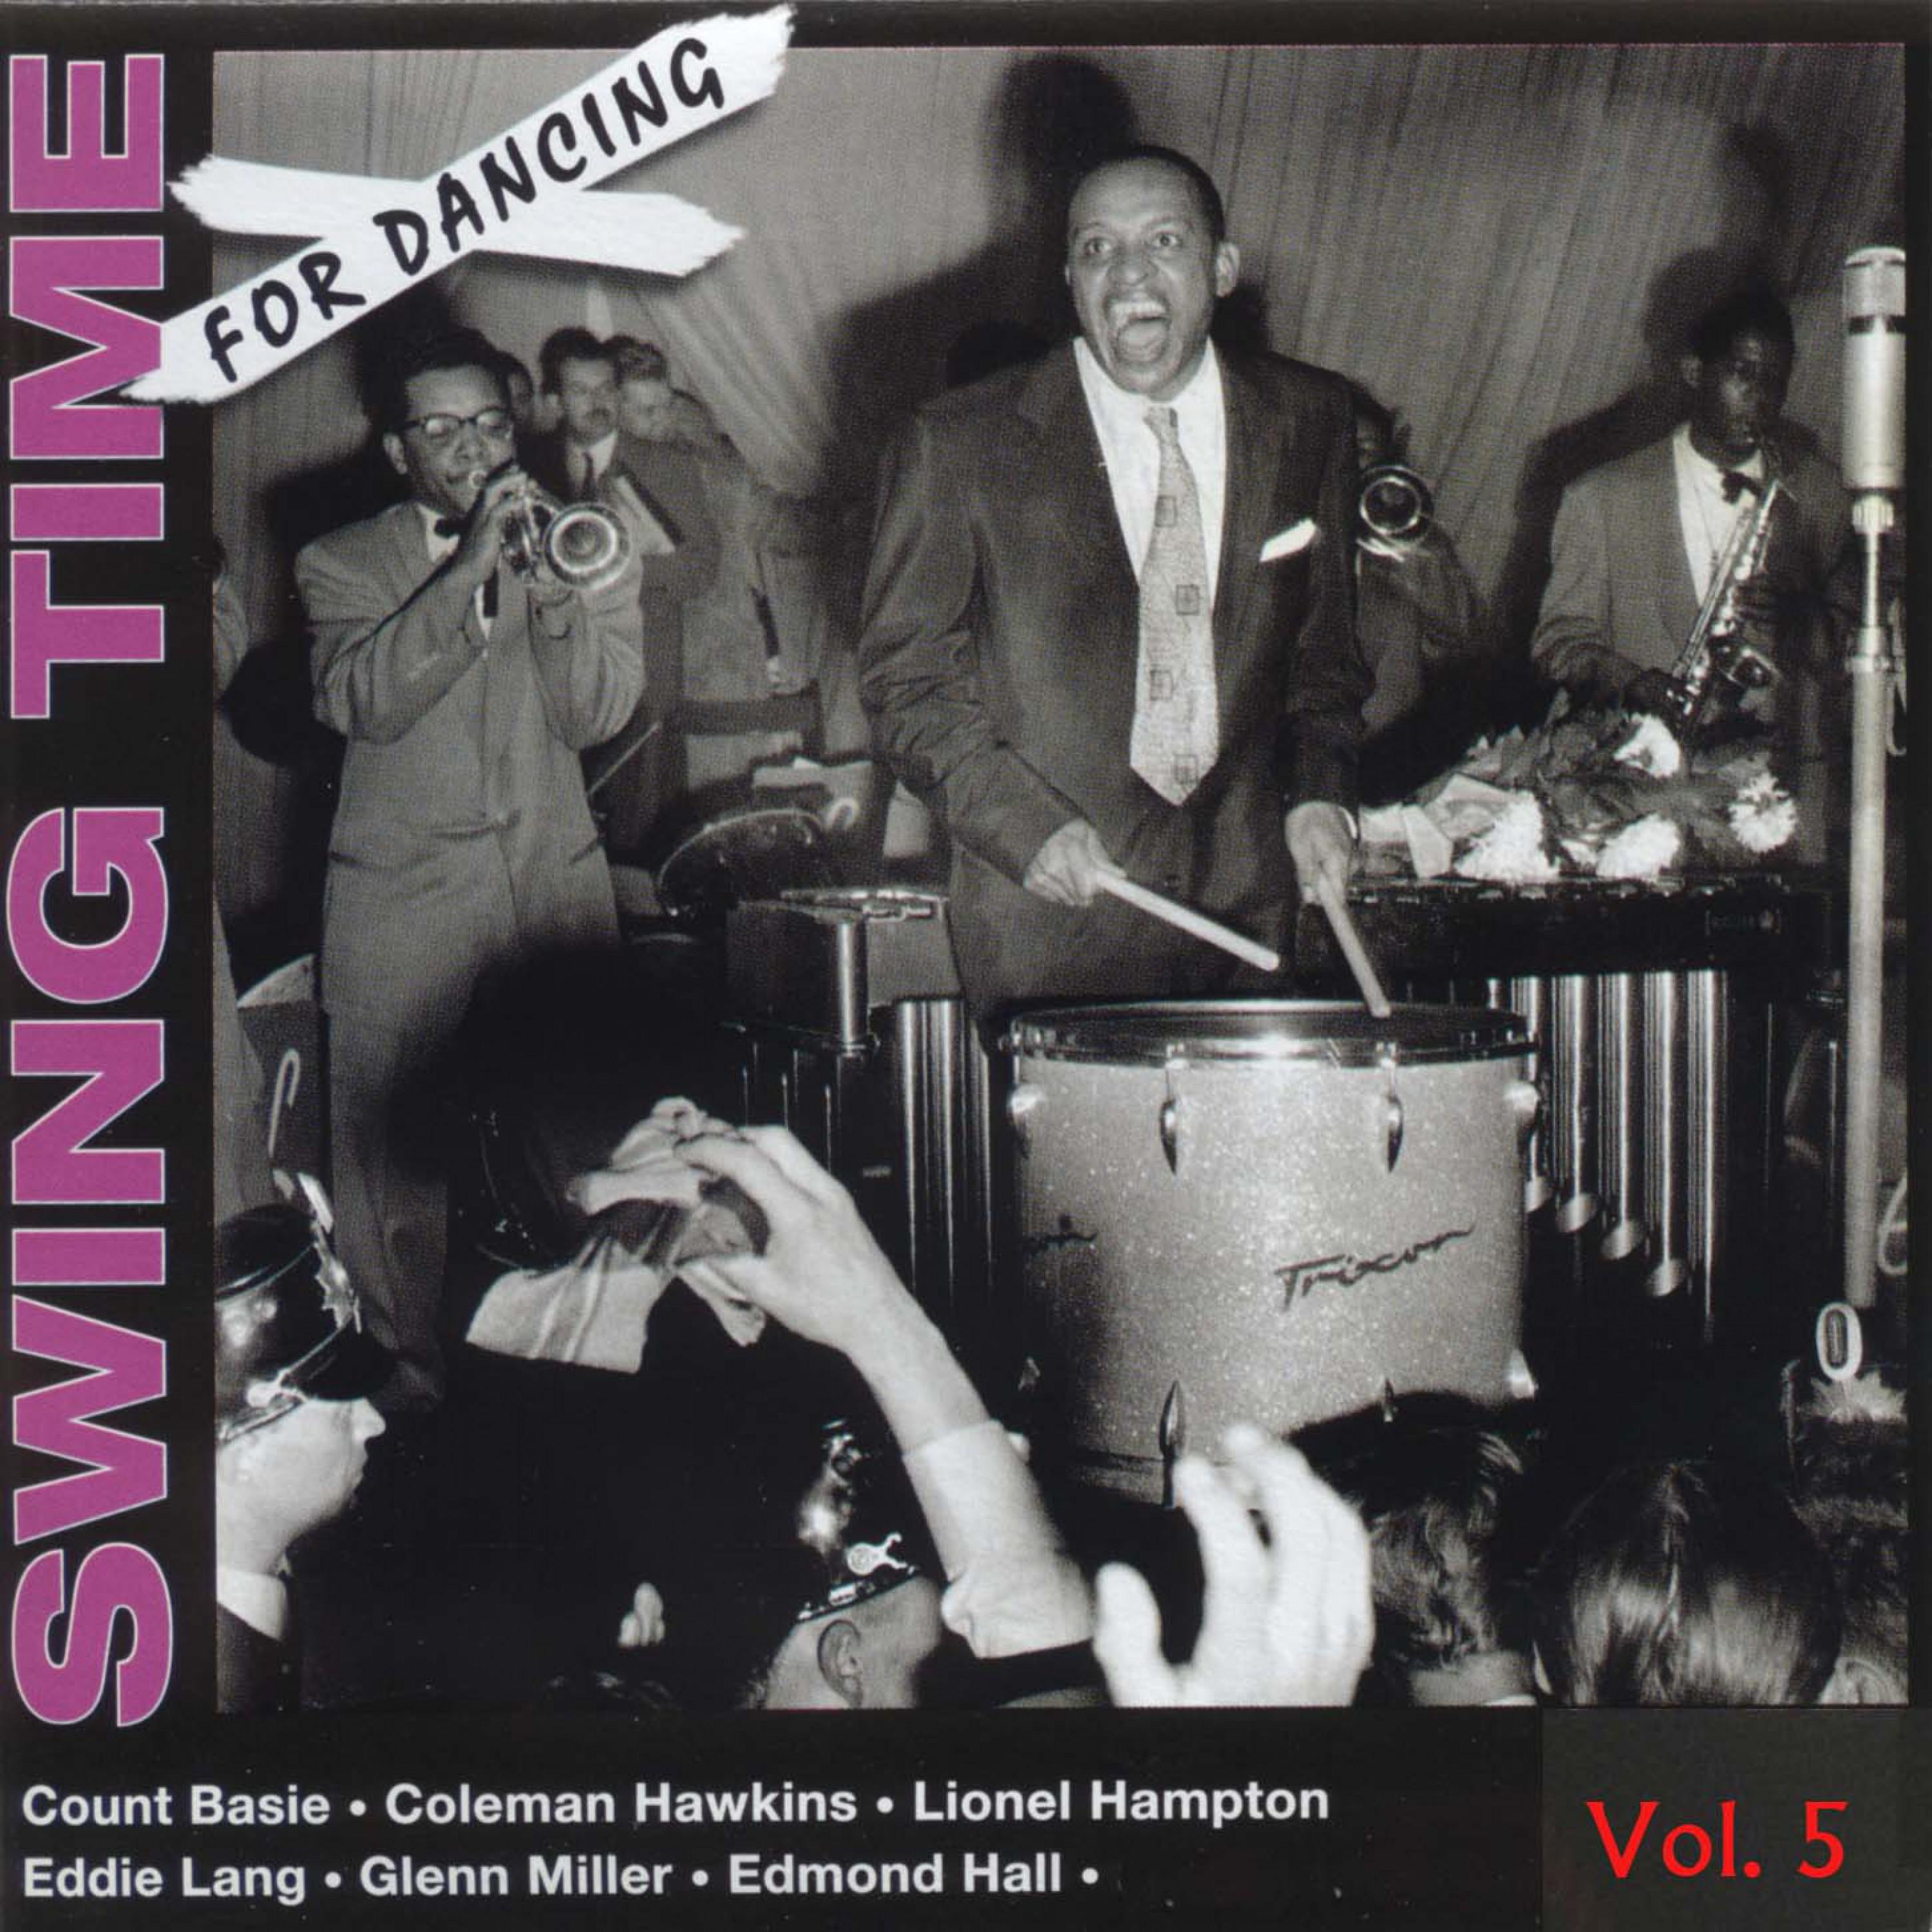 Swing Time for Dancing Vol. 5